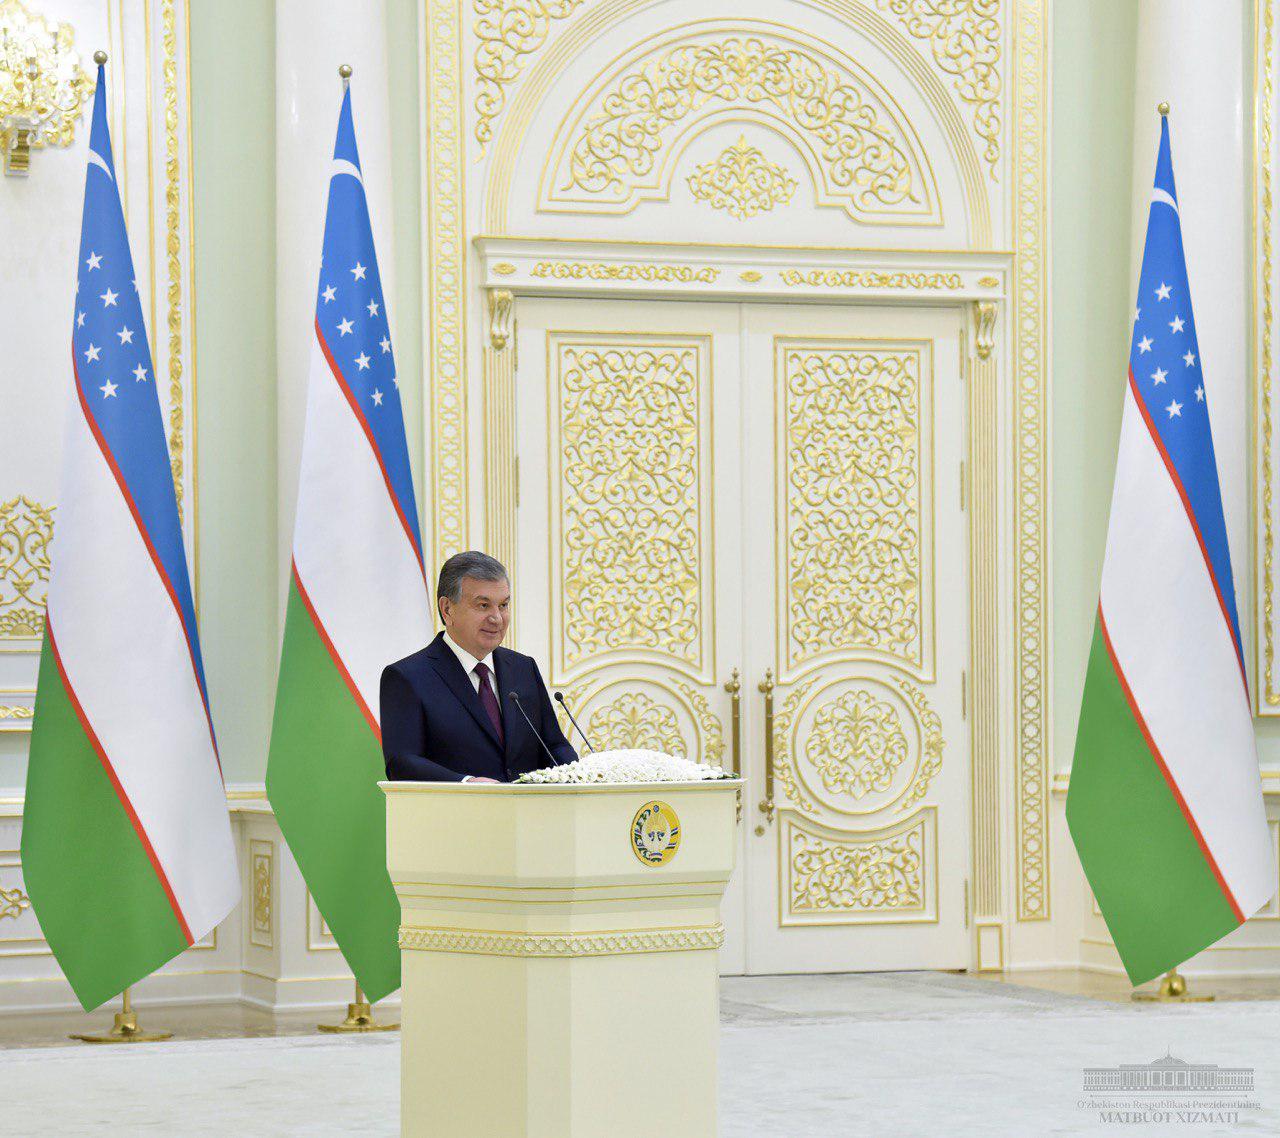 The President of Uzbekistan accepts credentials of foreign ambassadors